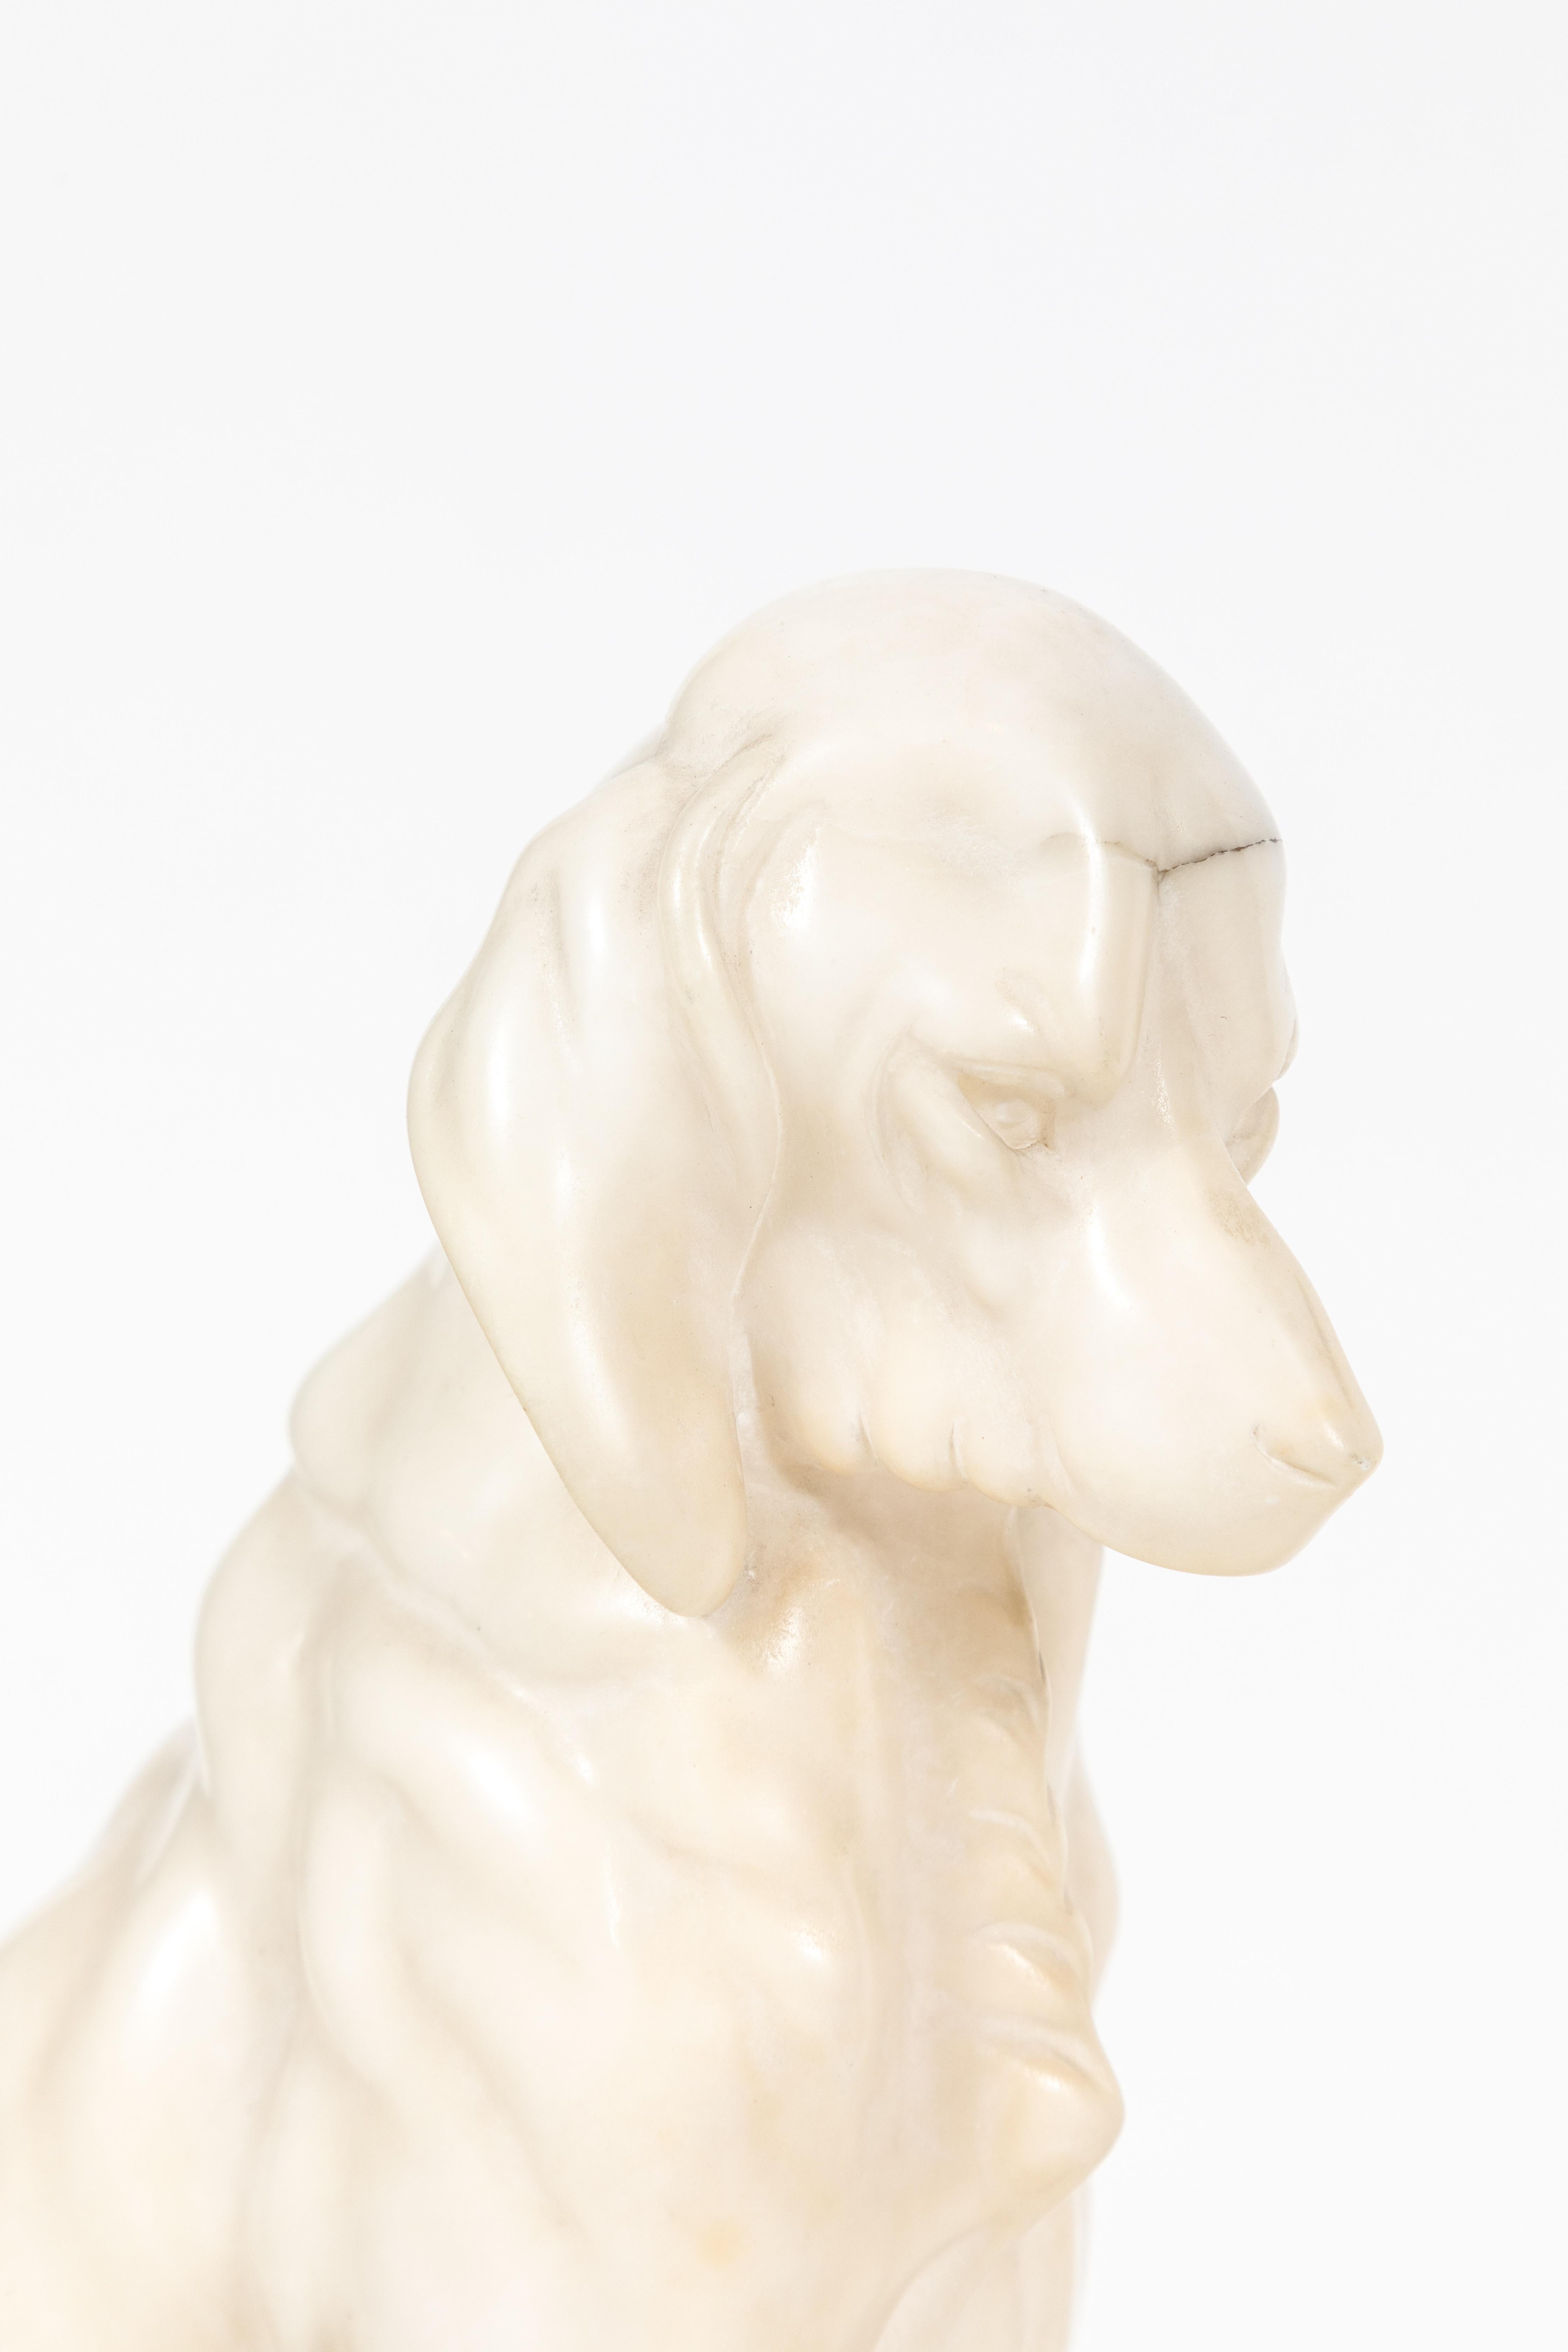 Turn-of-the-Century Marble Hounds In Good Condition For Sale In Newport Beach, CA